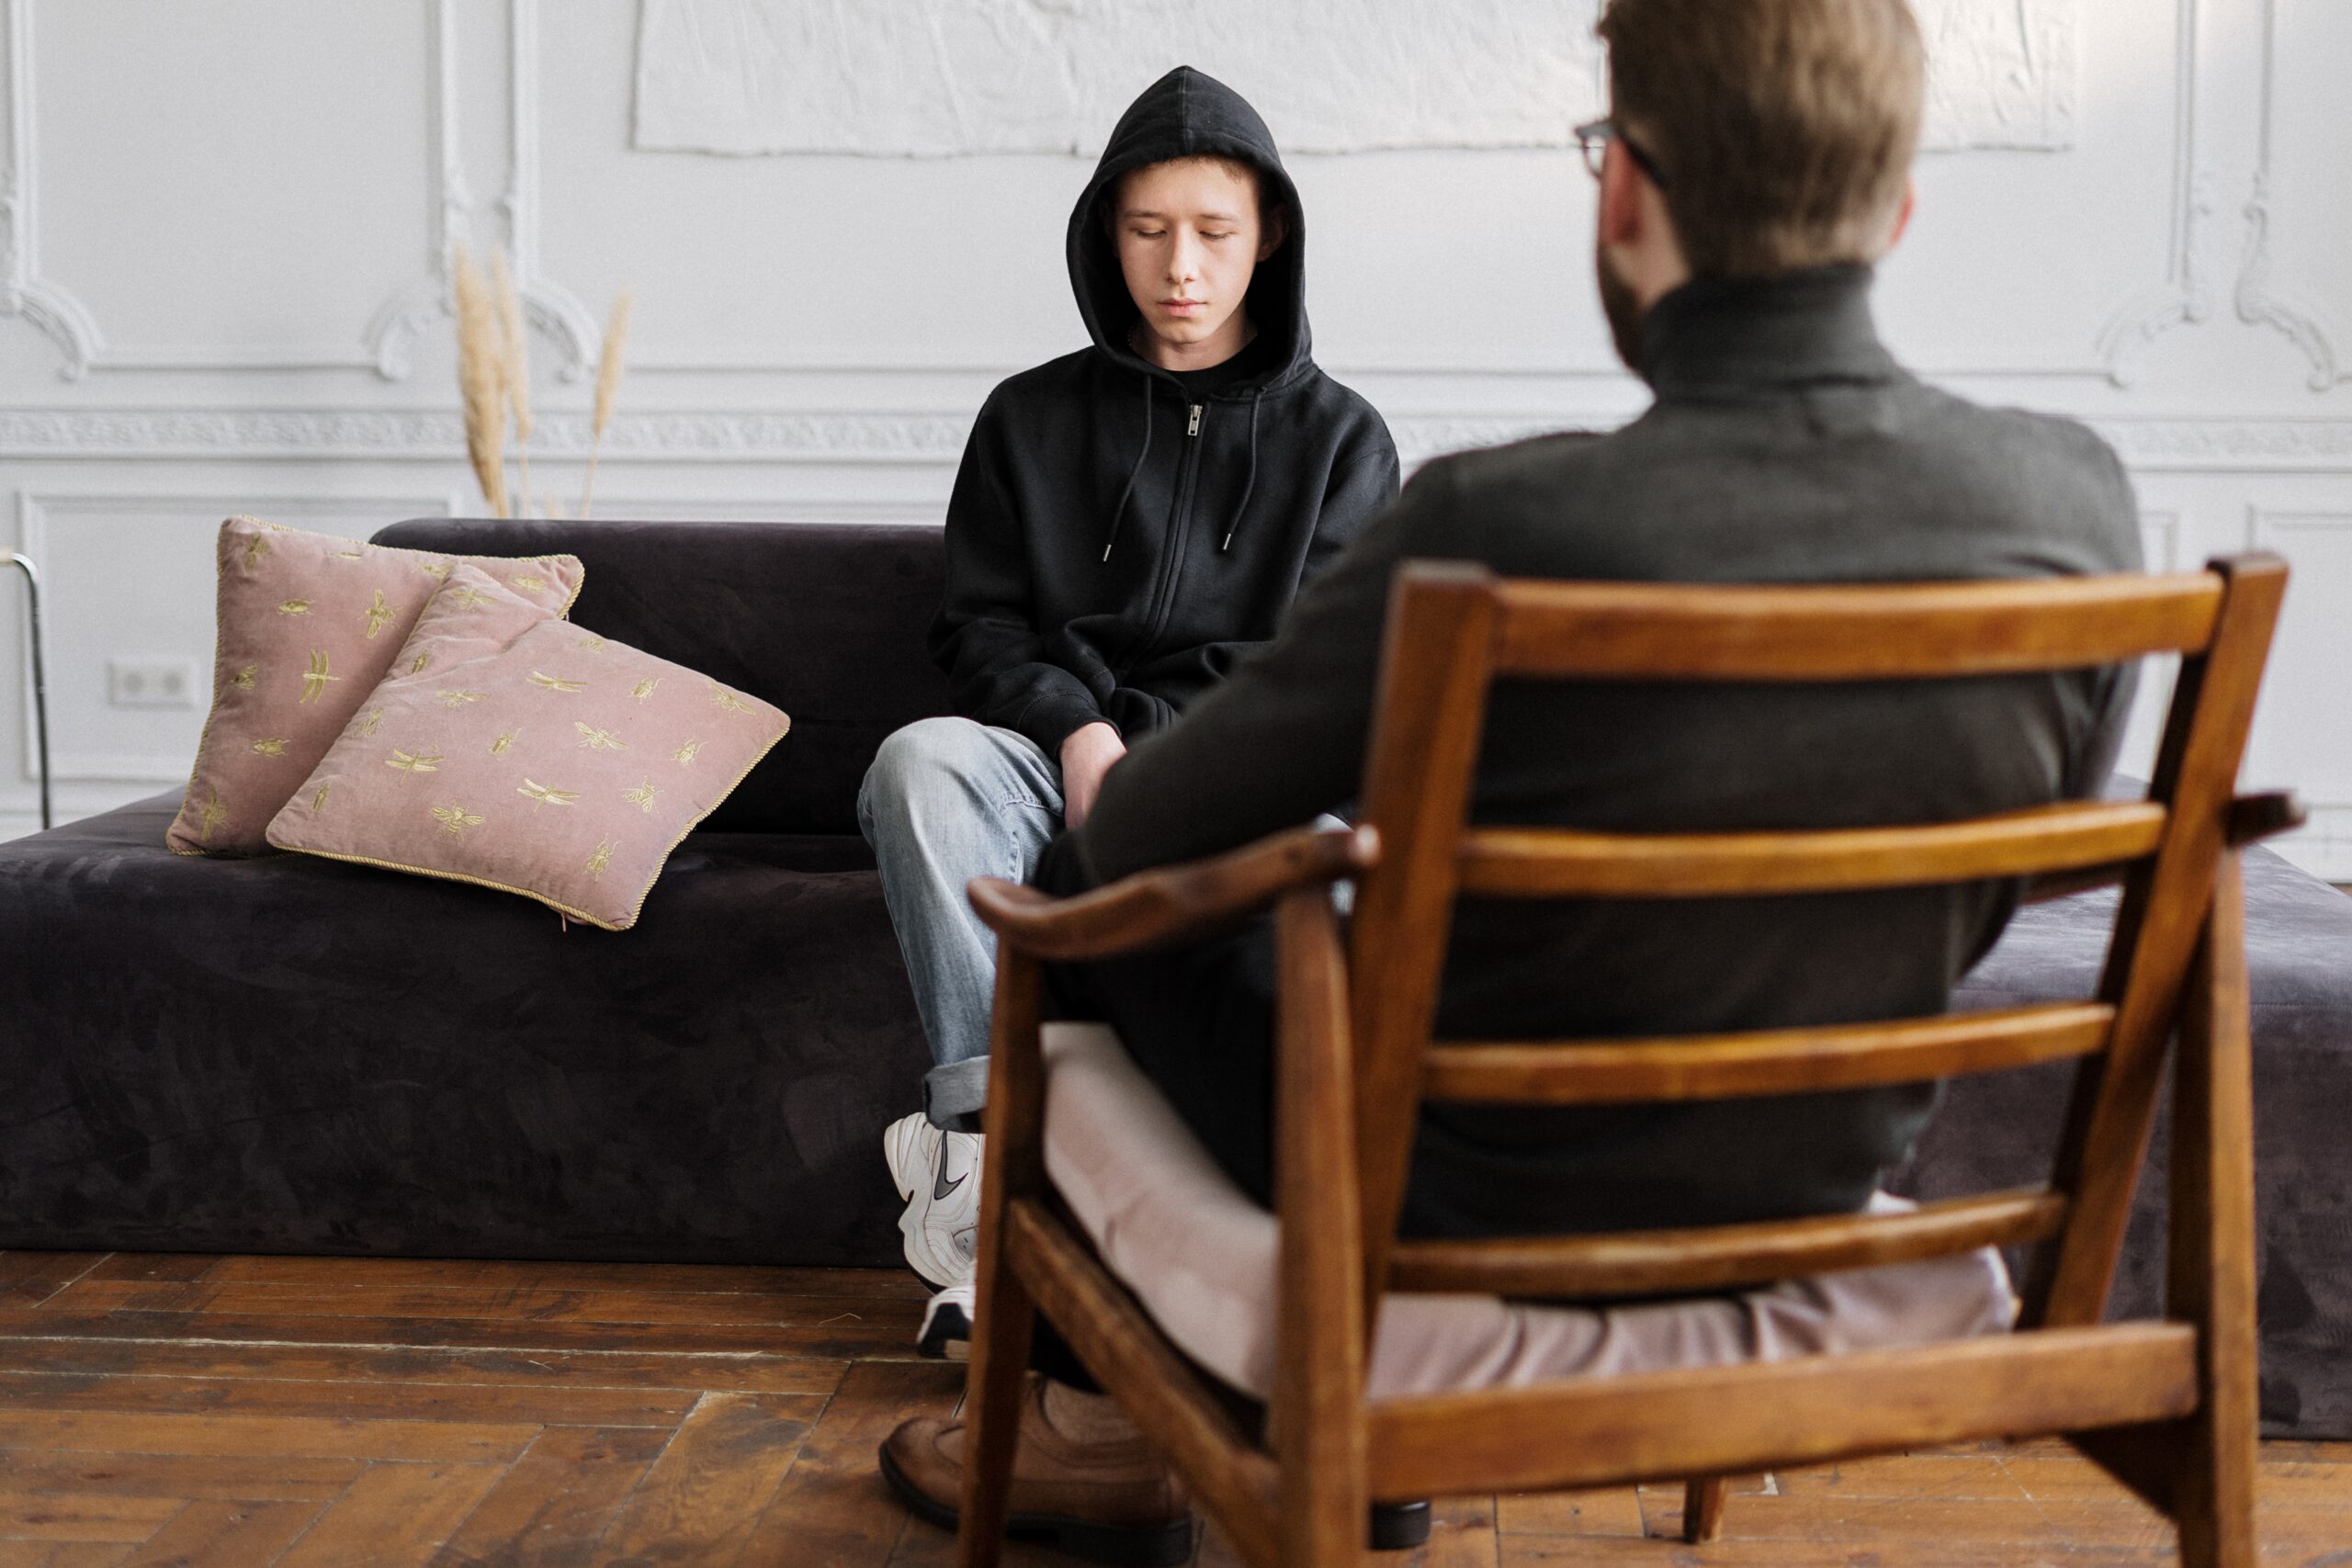 A person undergoing therapy